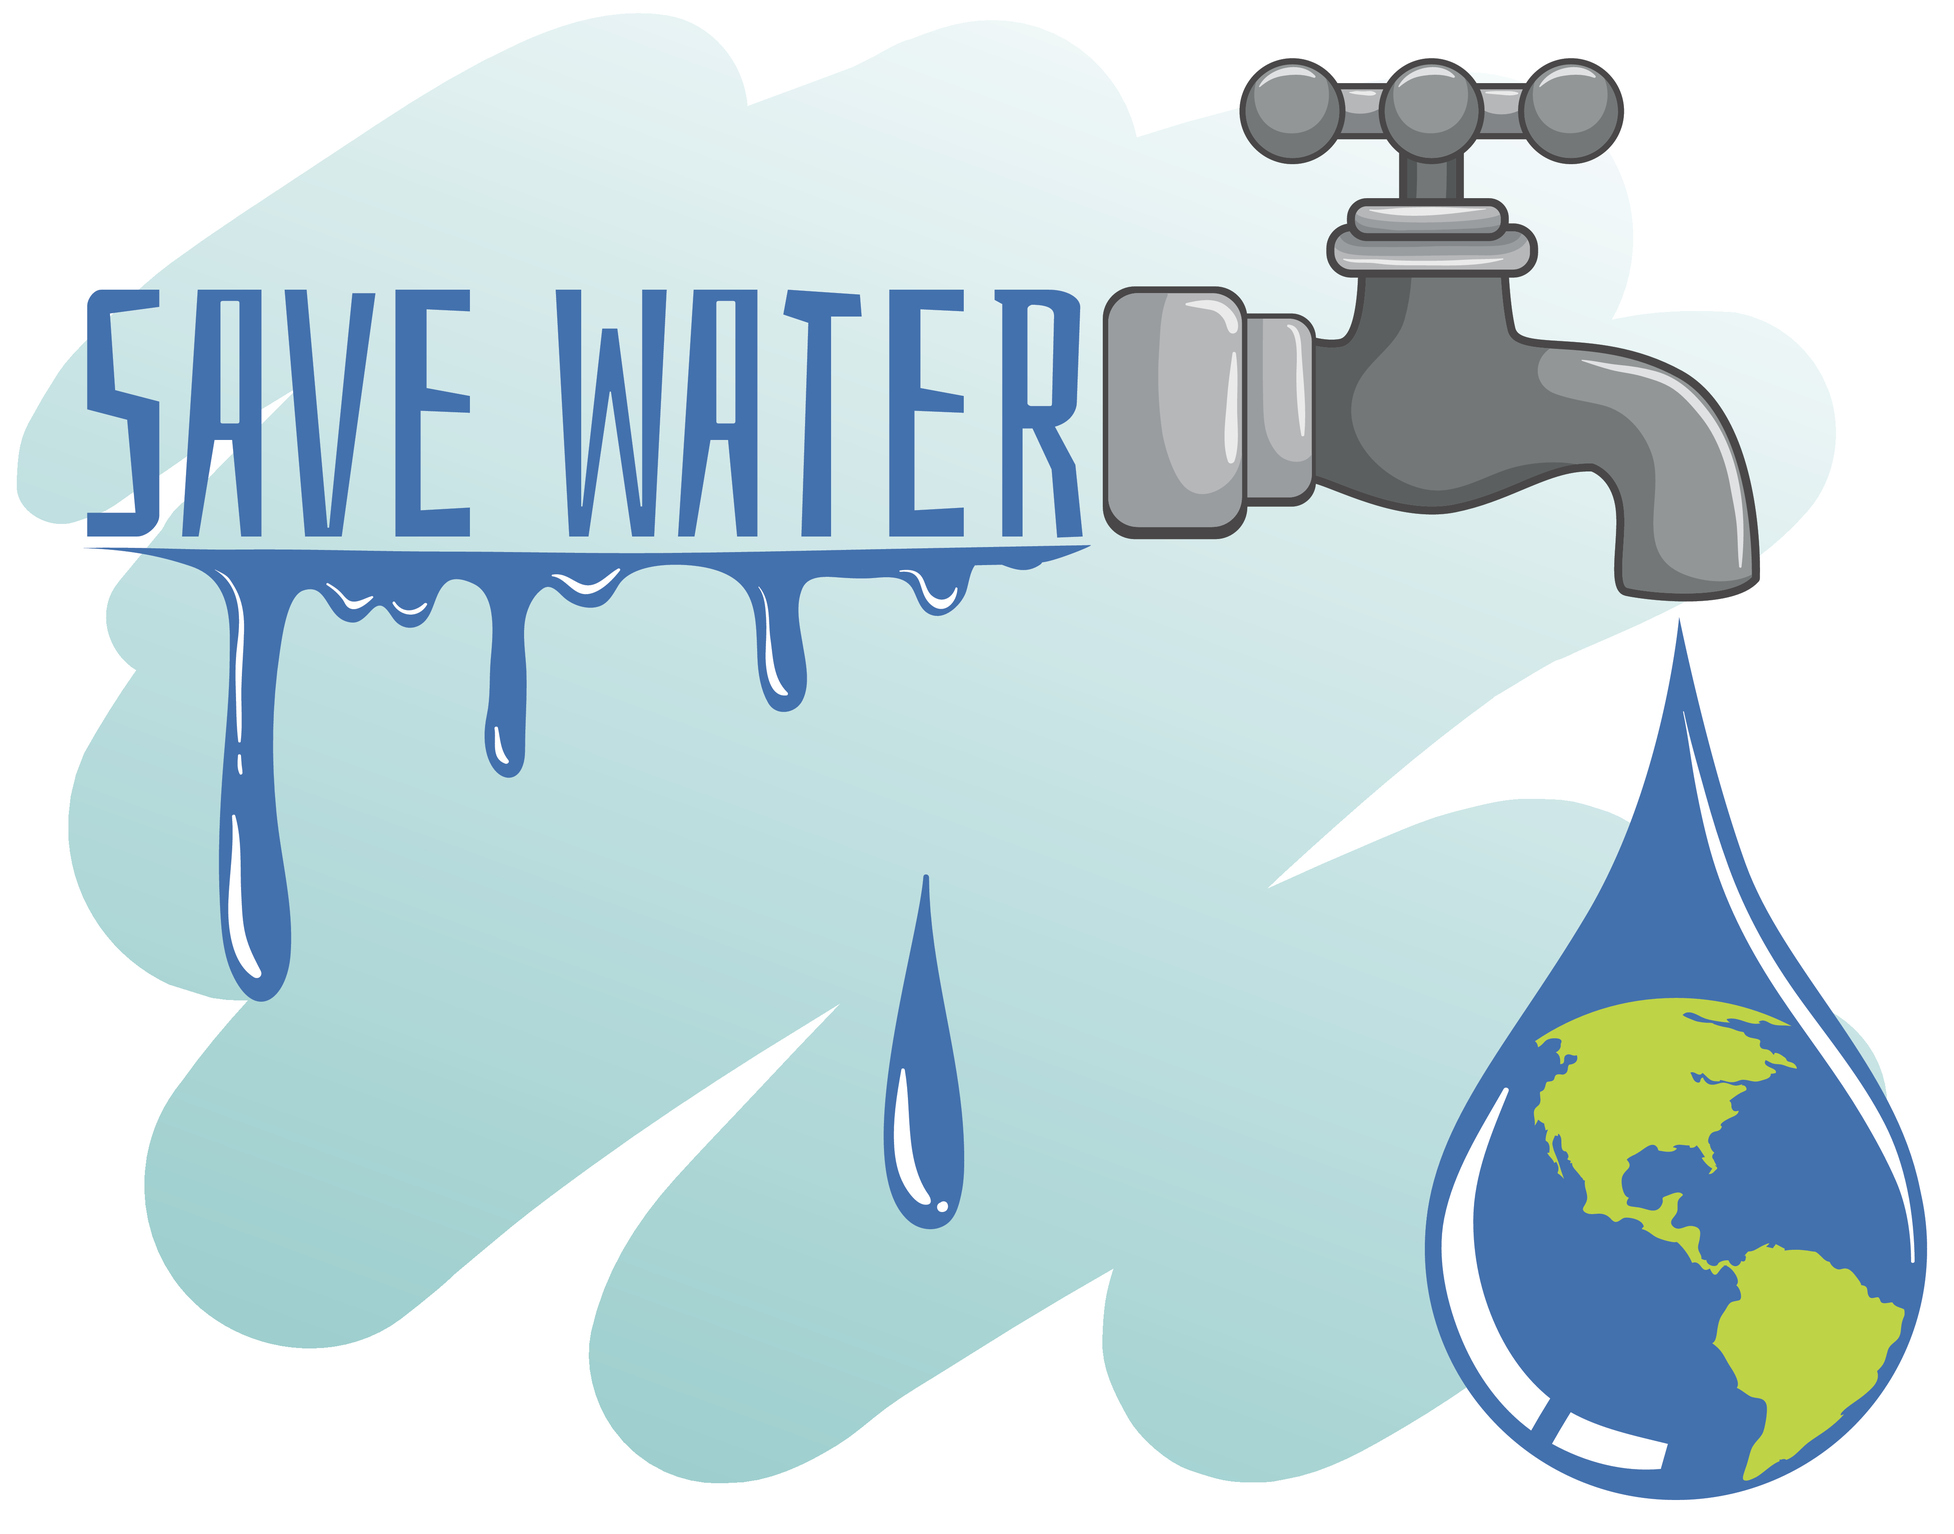 How can schools help save water?